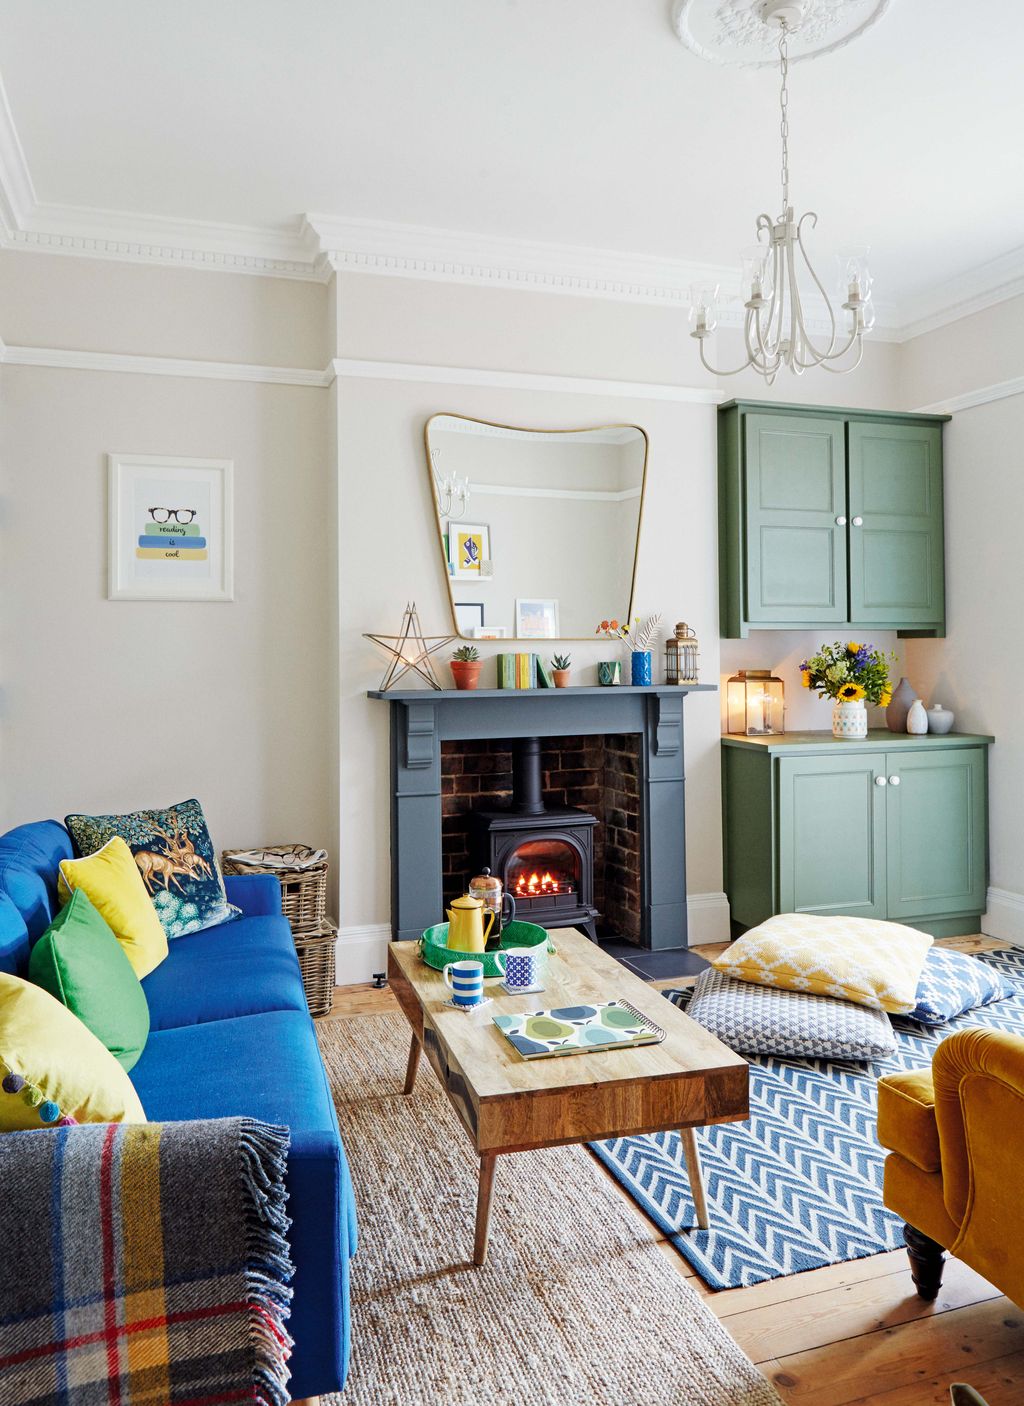 Real home: renovating a Victorian semi for modern family life | Real Homes